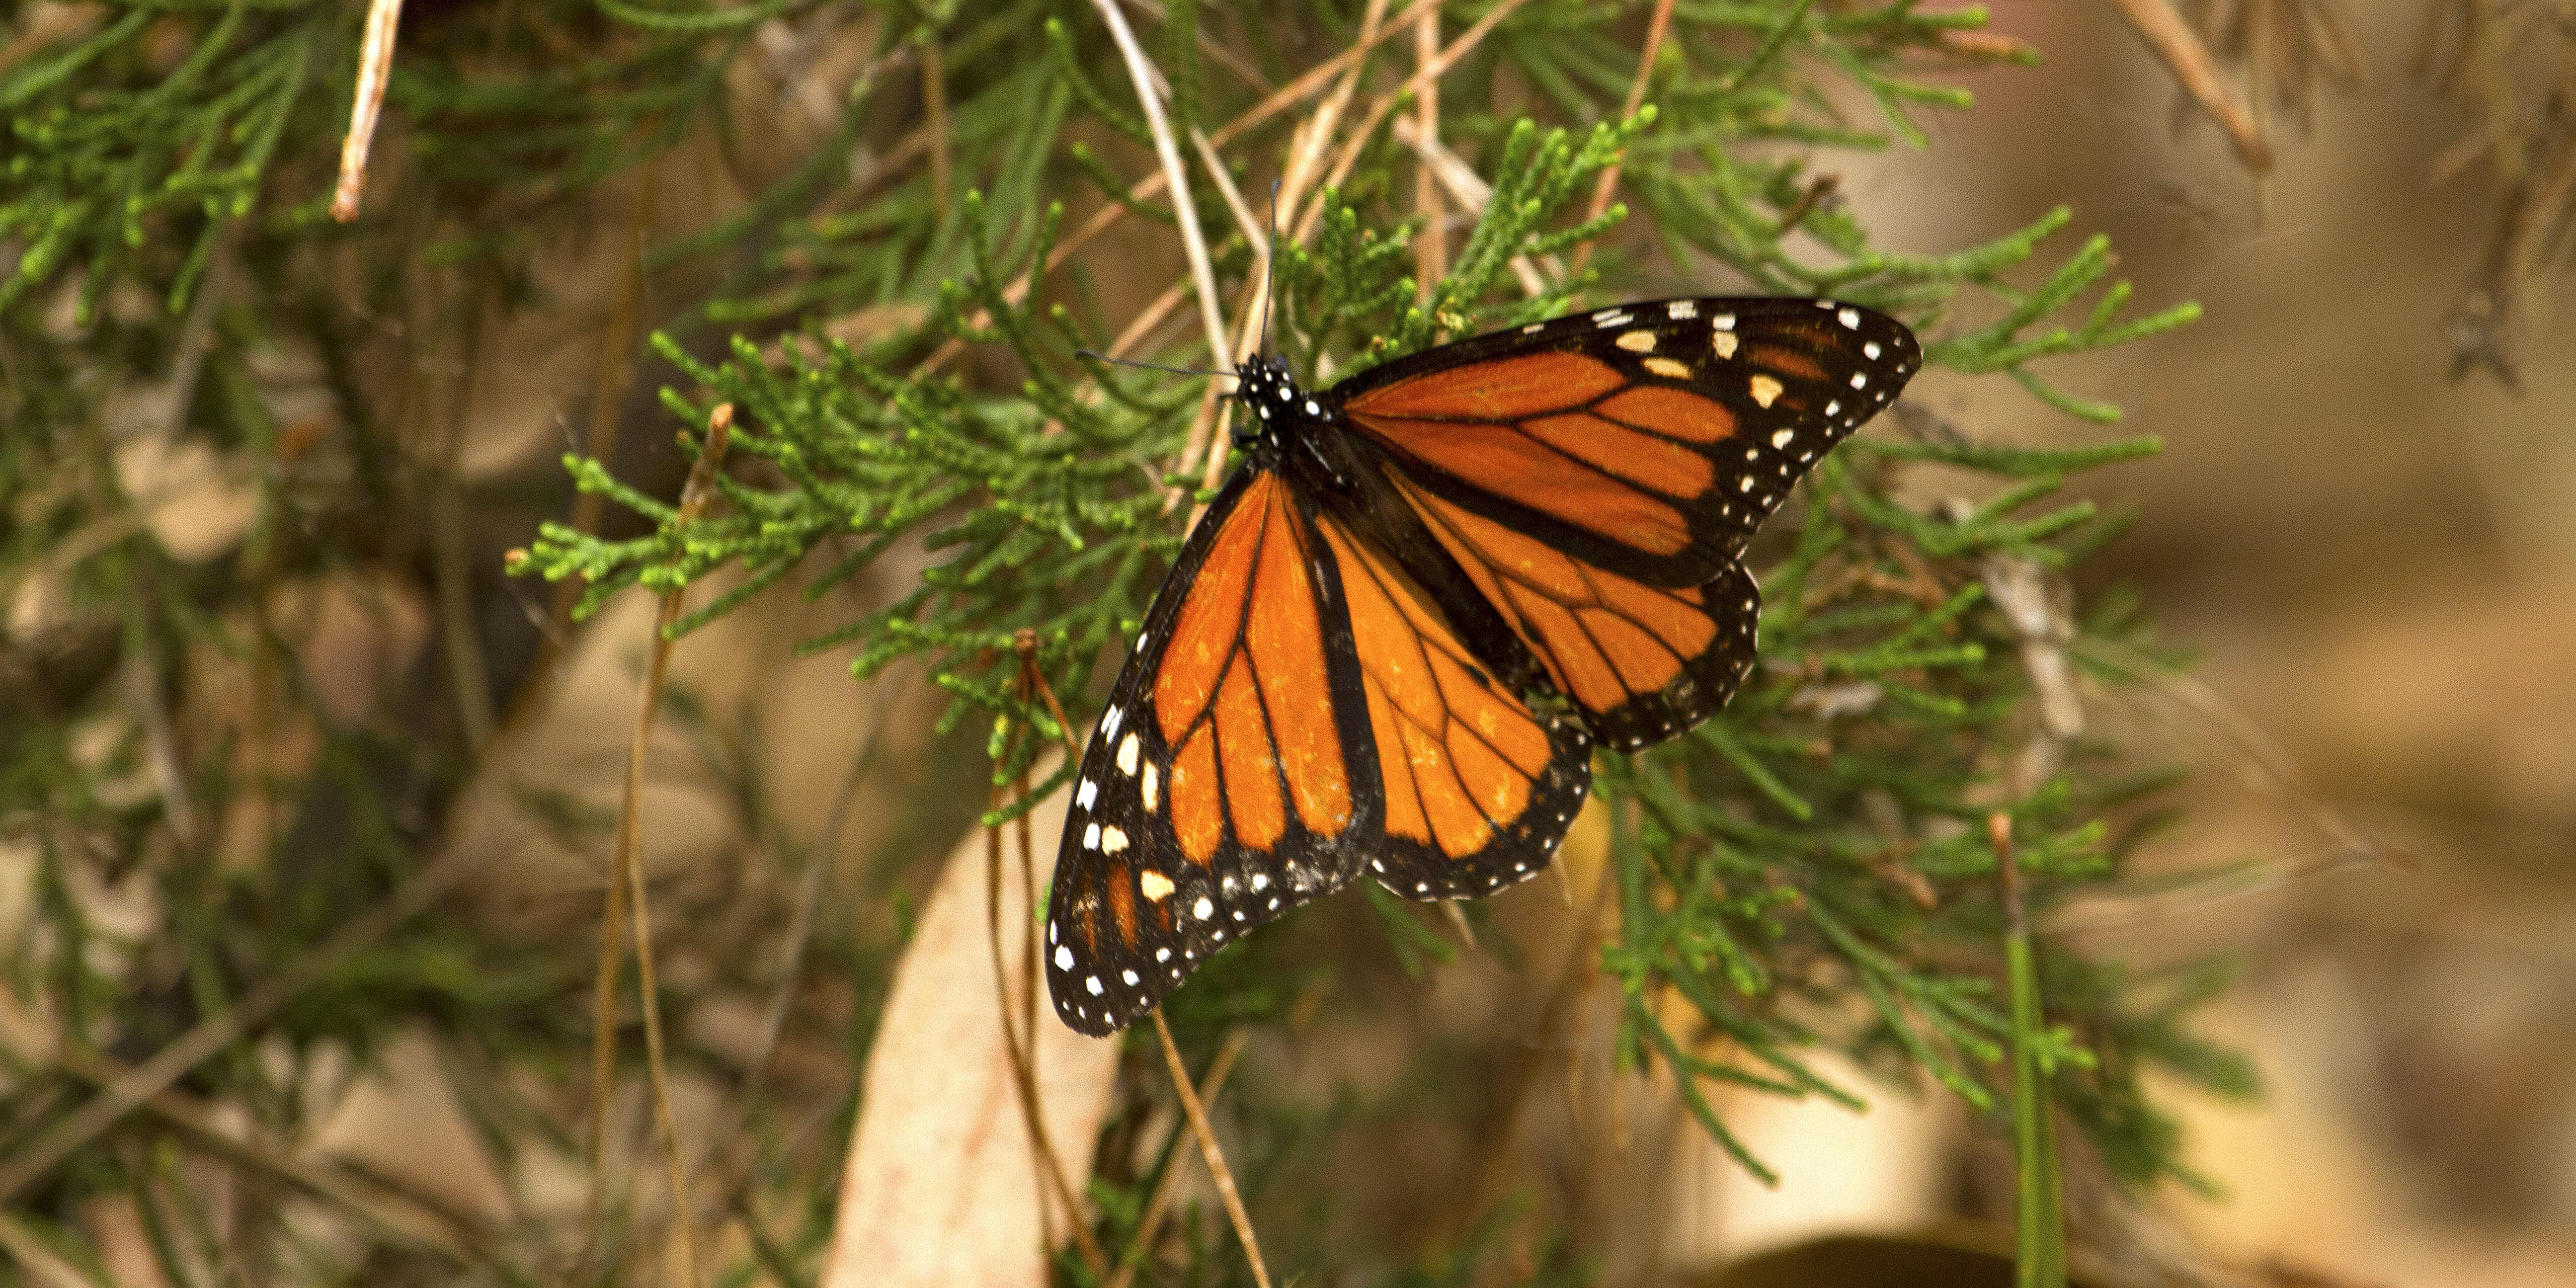 A monarch butterfly in nature.